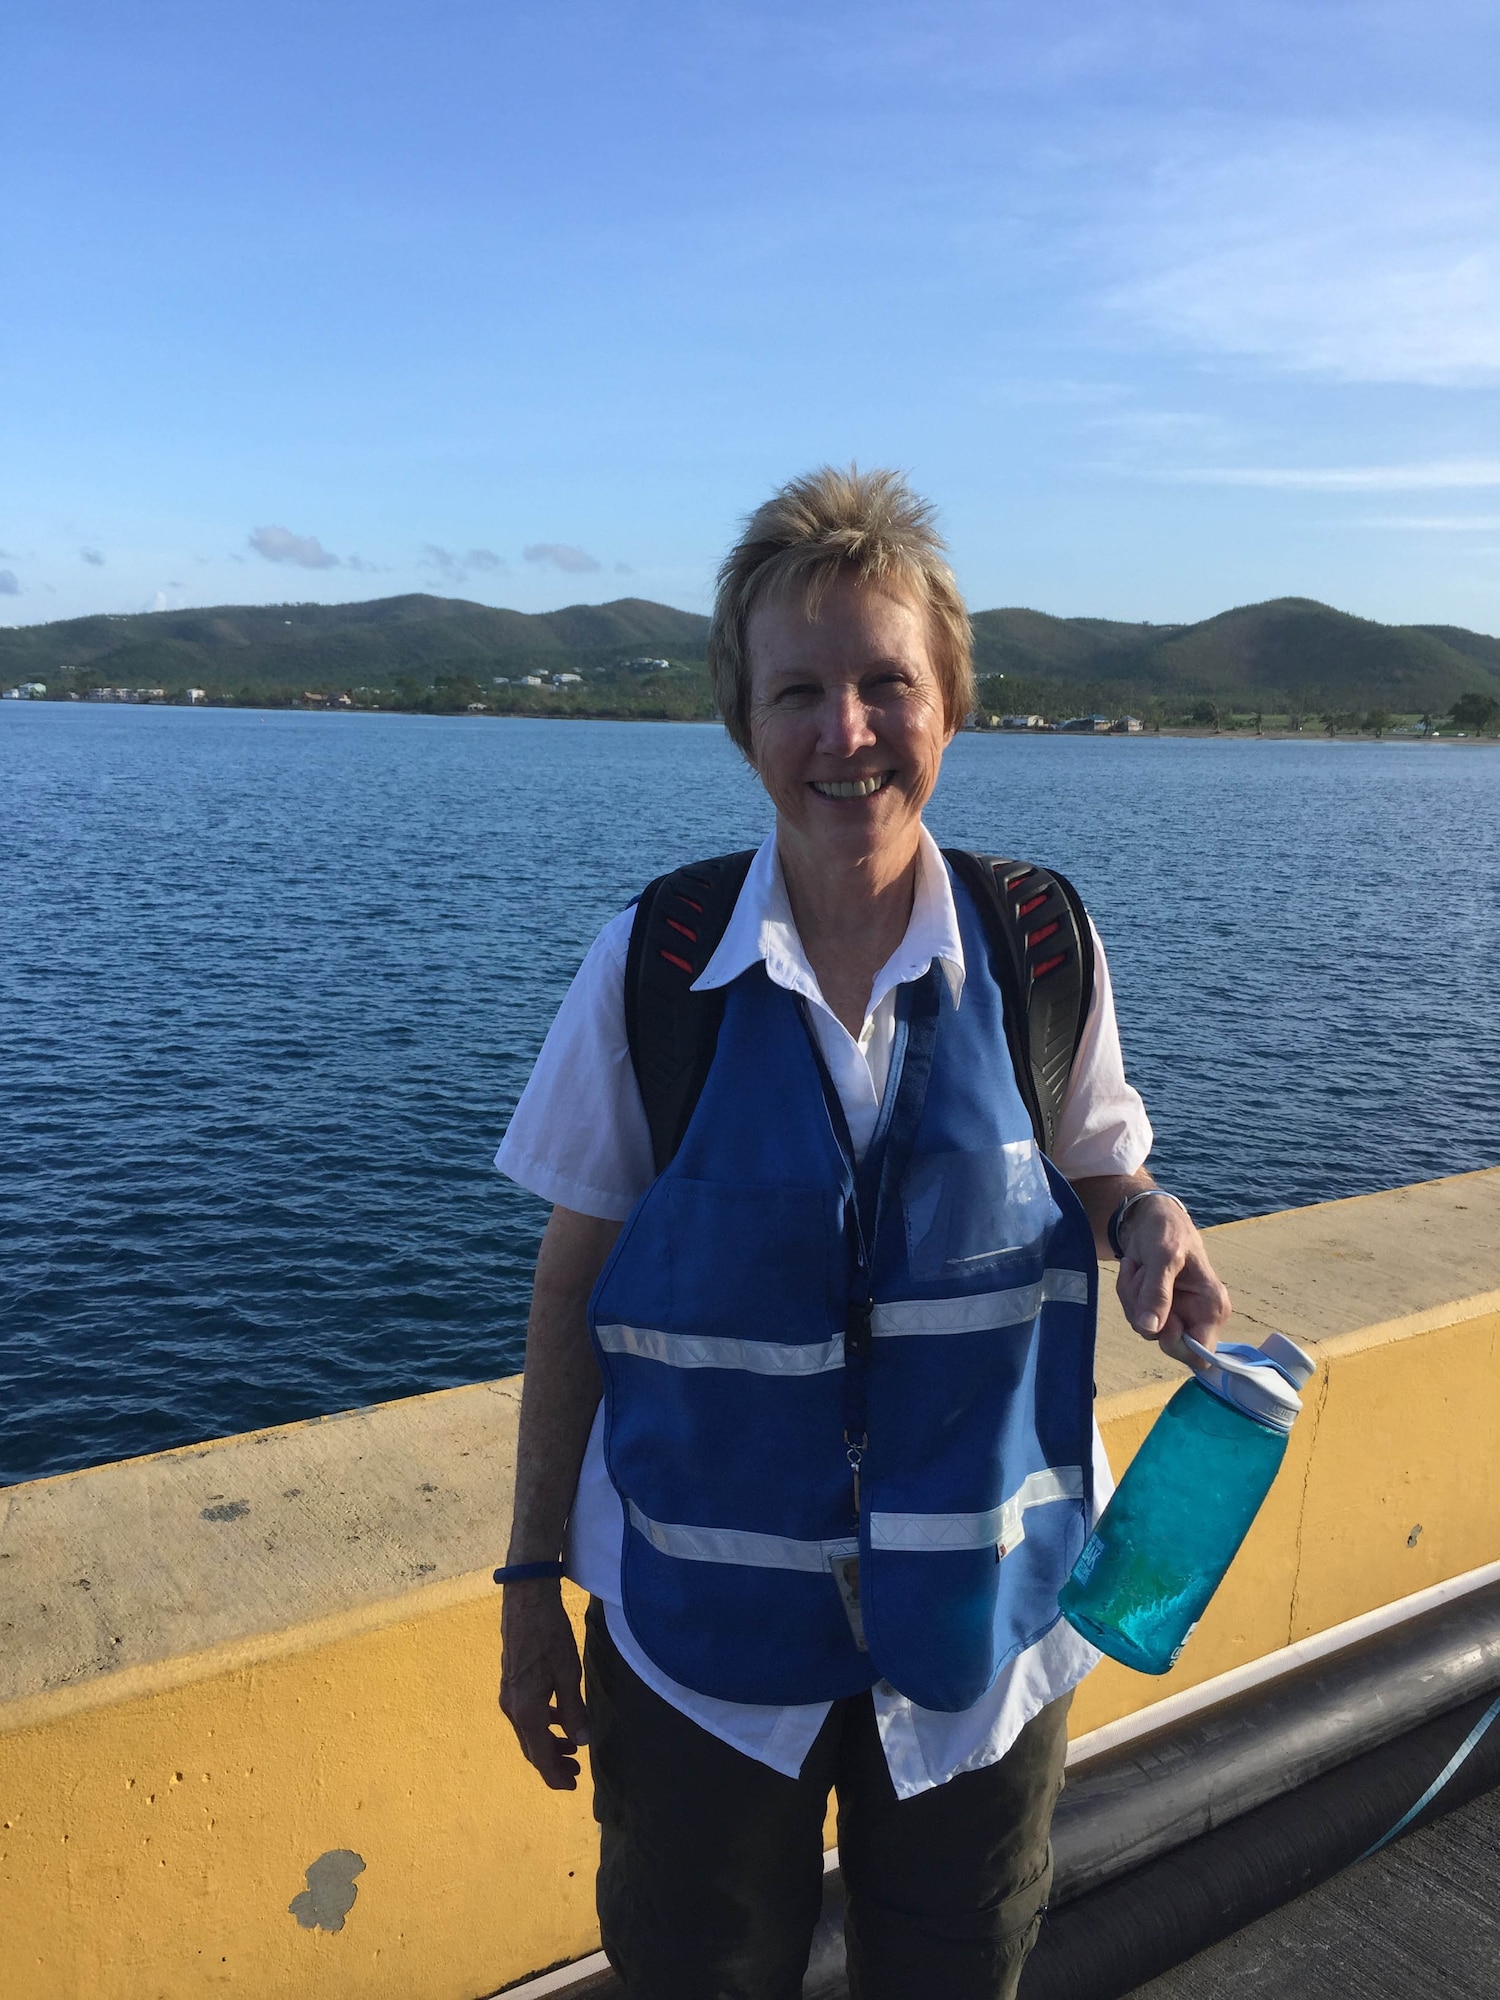 Claudette Wells, an acquisition program manager for the Air Force Technical Applications Center, Patrick AFB, Fla., stands near the dock at Frederiksted, St. Croix as she prepares to head out to work as a Federal Emergency Management Agency disaster relief volunteer.  Wells was part of FEMA's Surge Capacity Force that helped those affected by Hurricane Maria, a Category 5 storm that barreled through the Caribbean in September 2017.  (Courtesy photo)